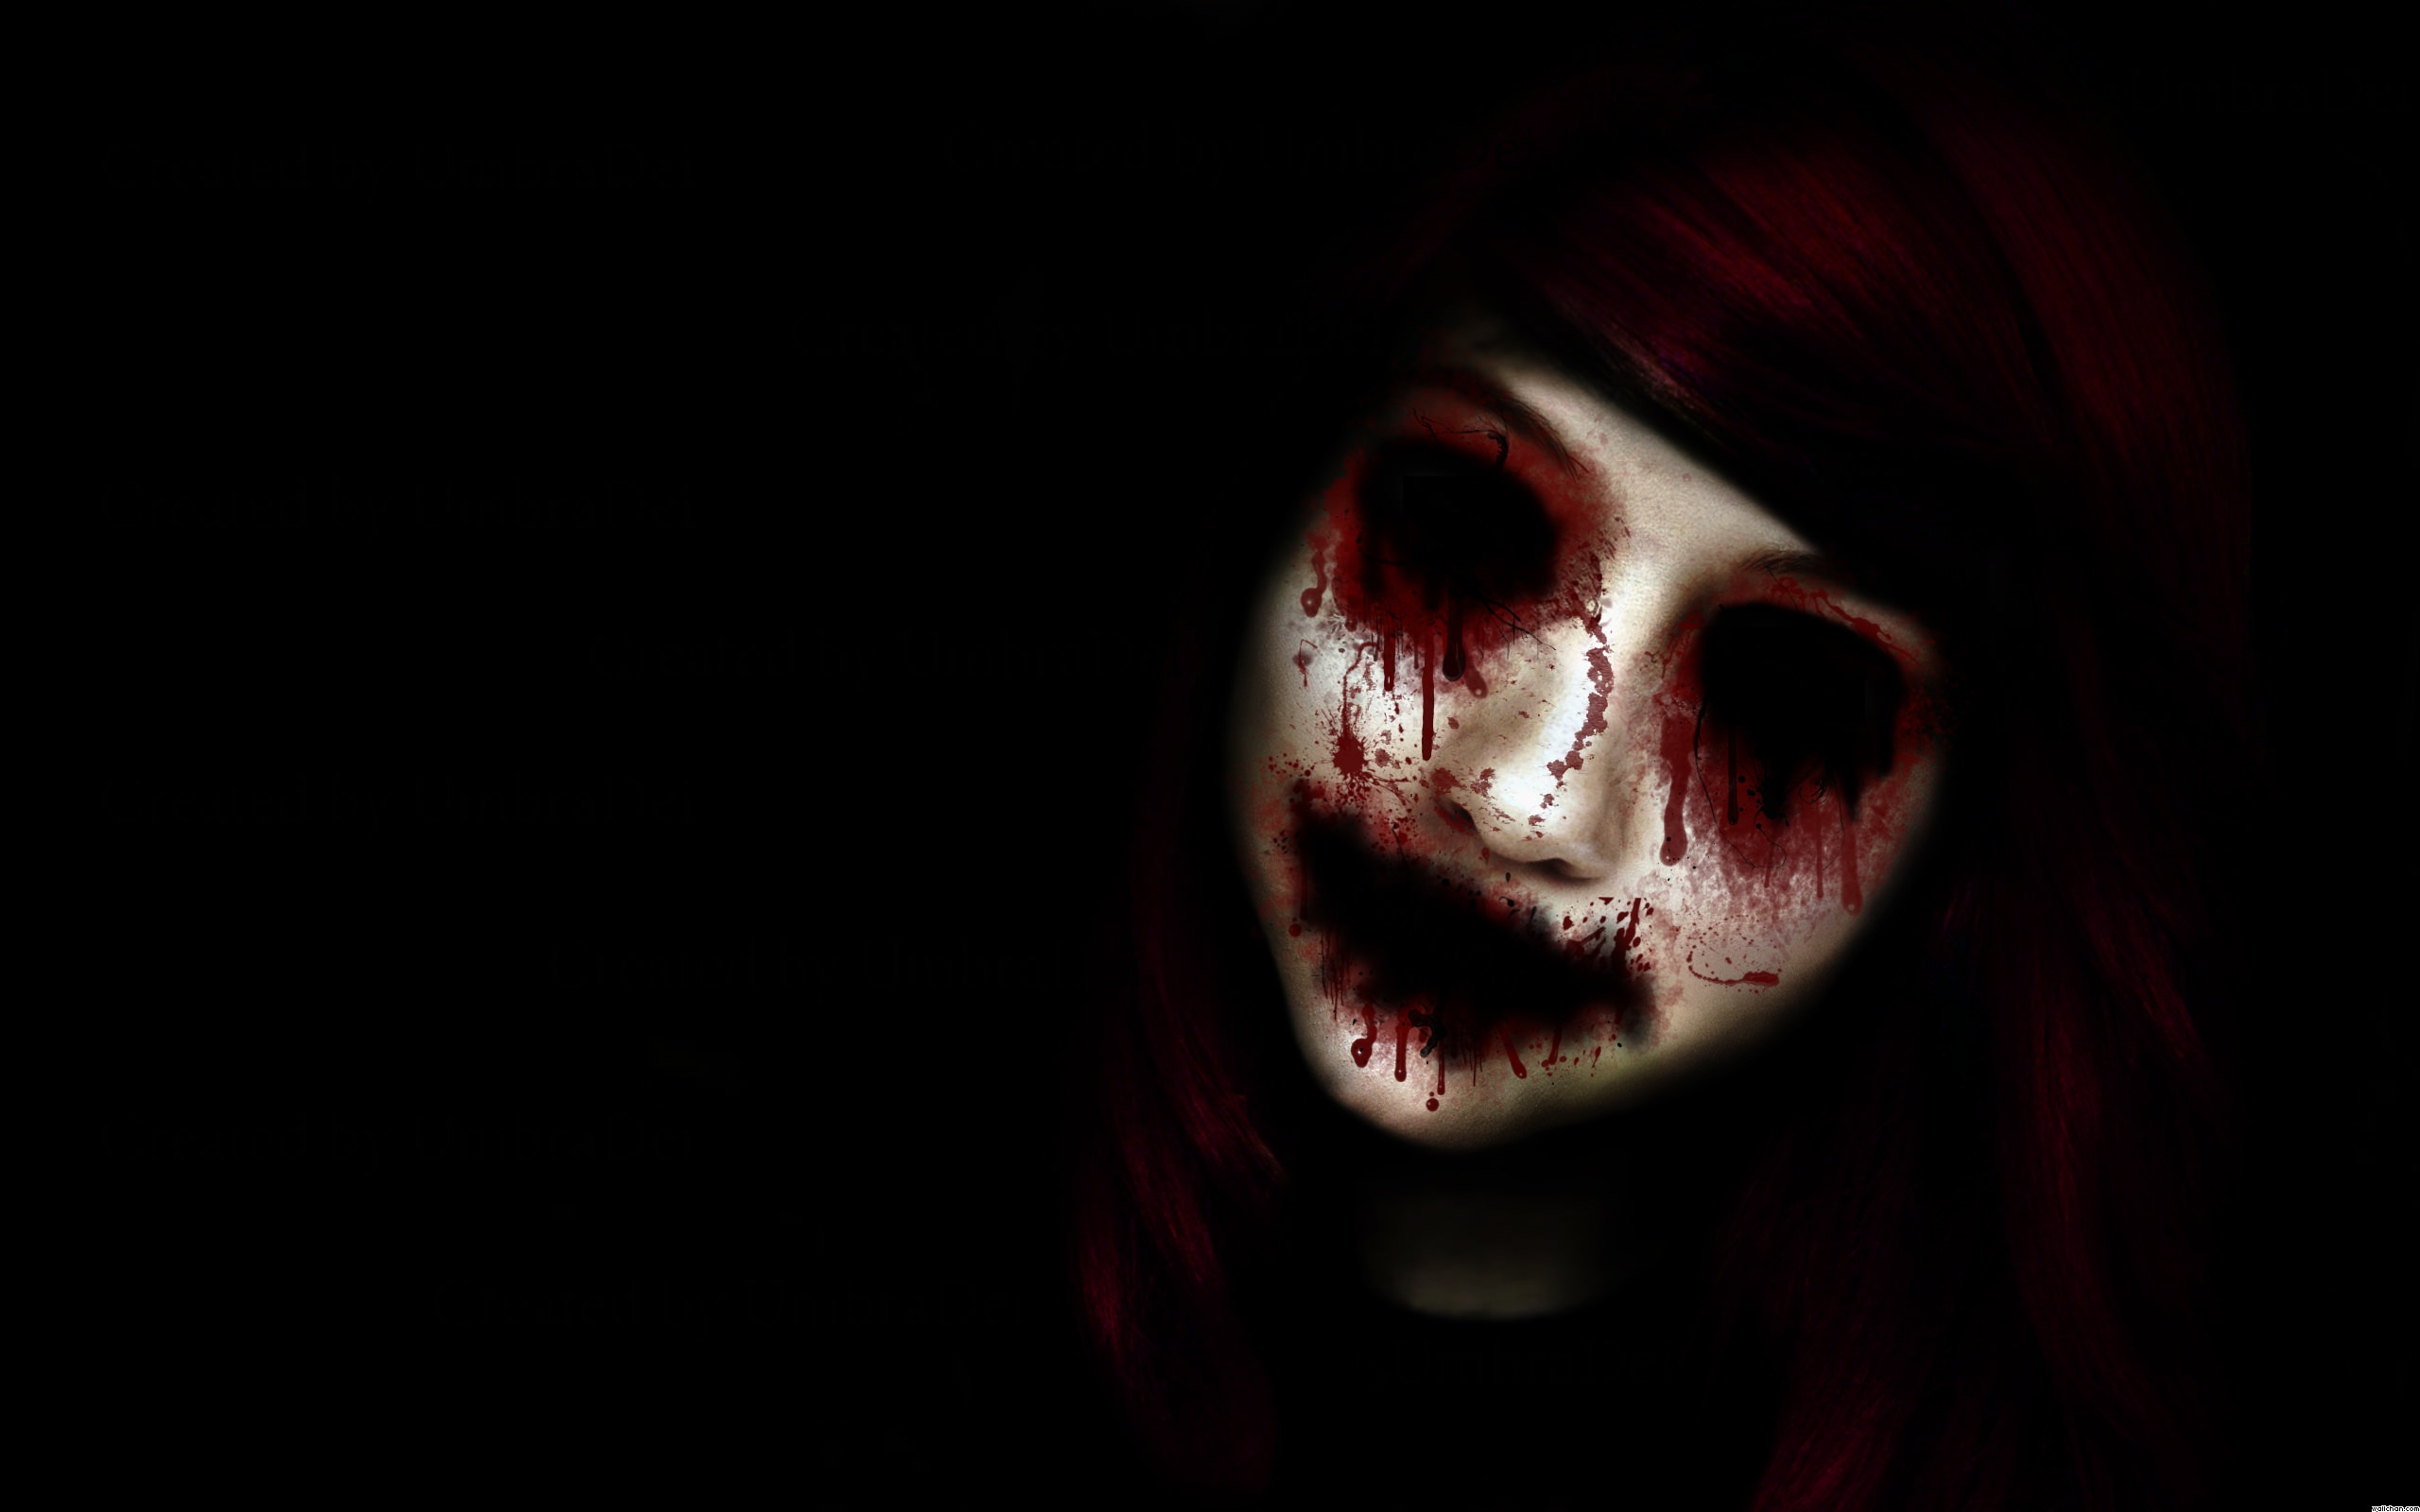 Creepy Wallpaper Hd Forest, Scary, Forest - Scary Face With Red Eyes - HD Wallpaper 